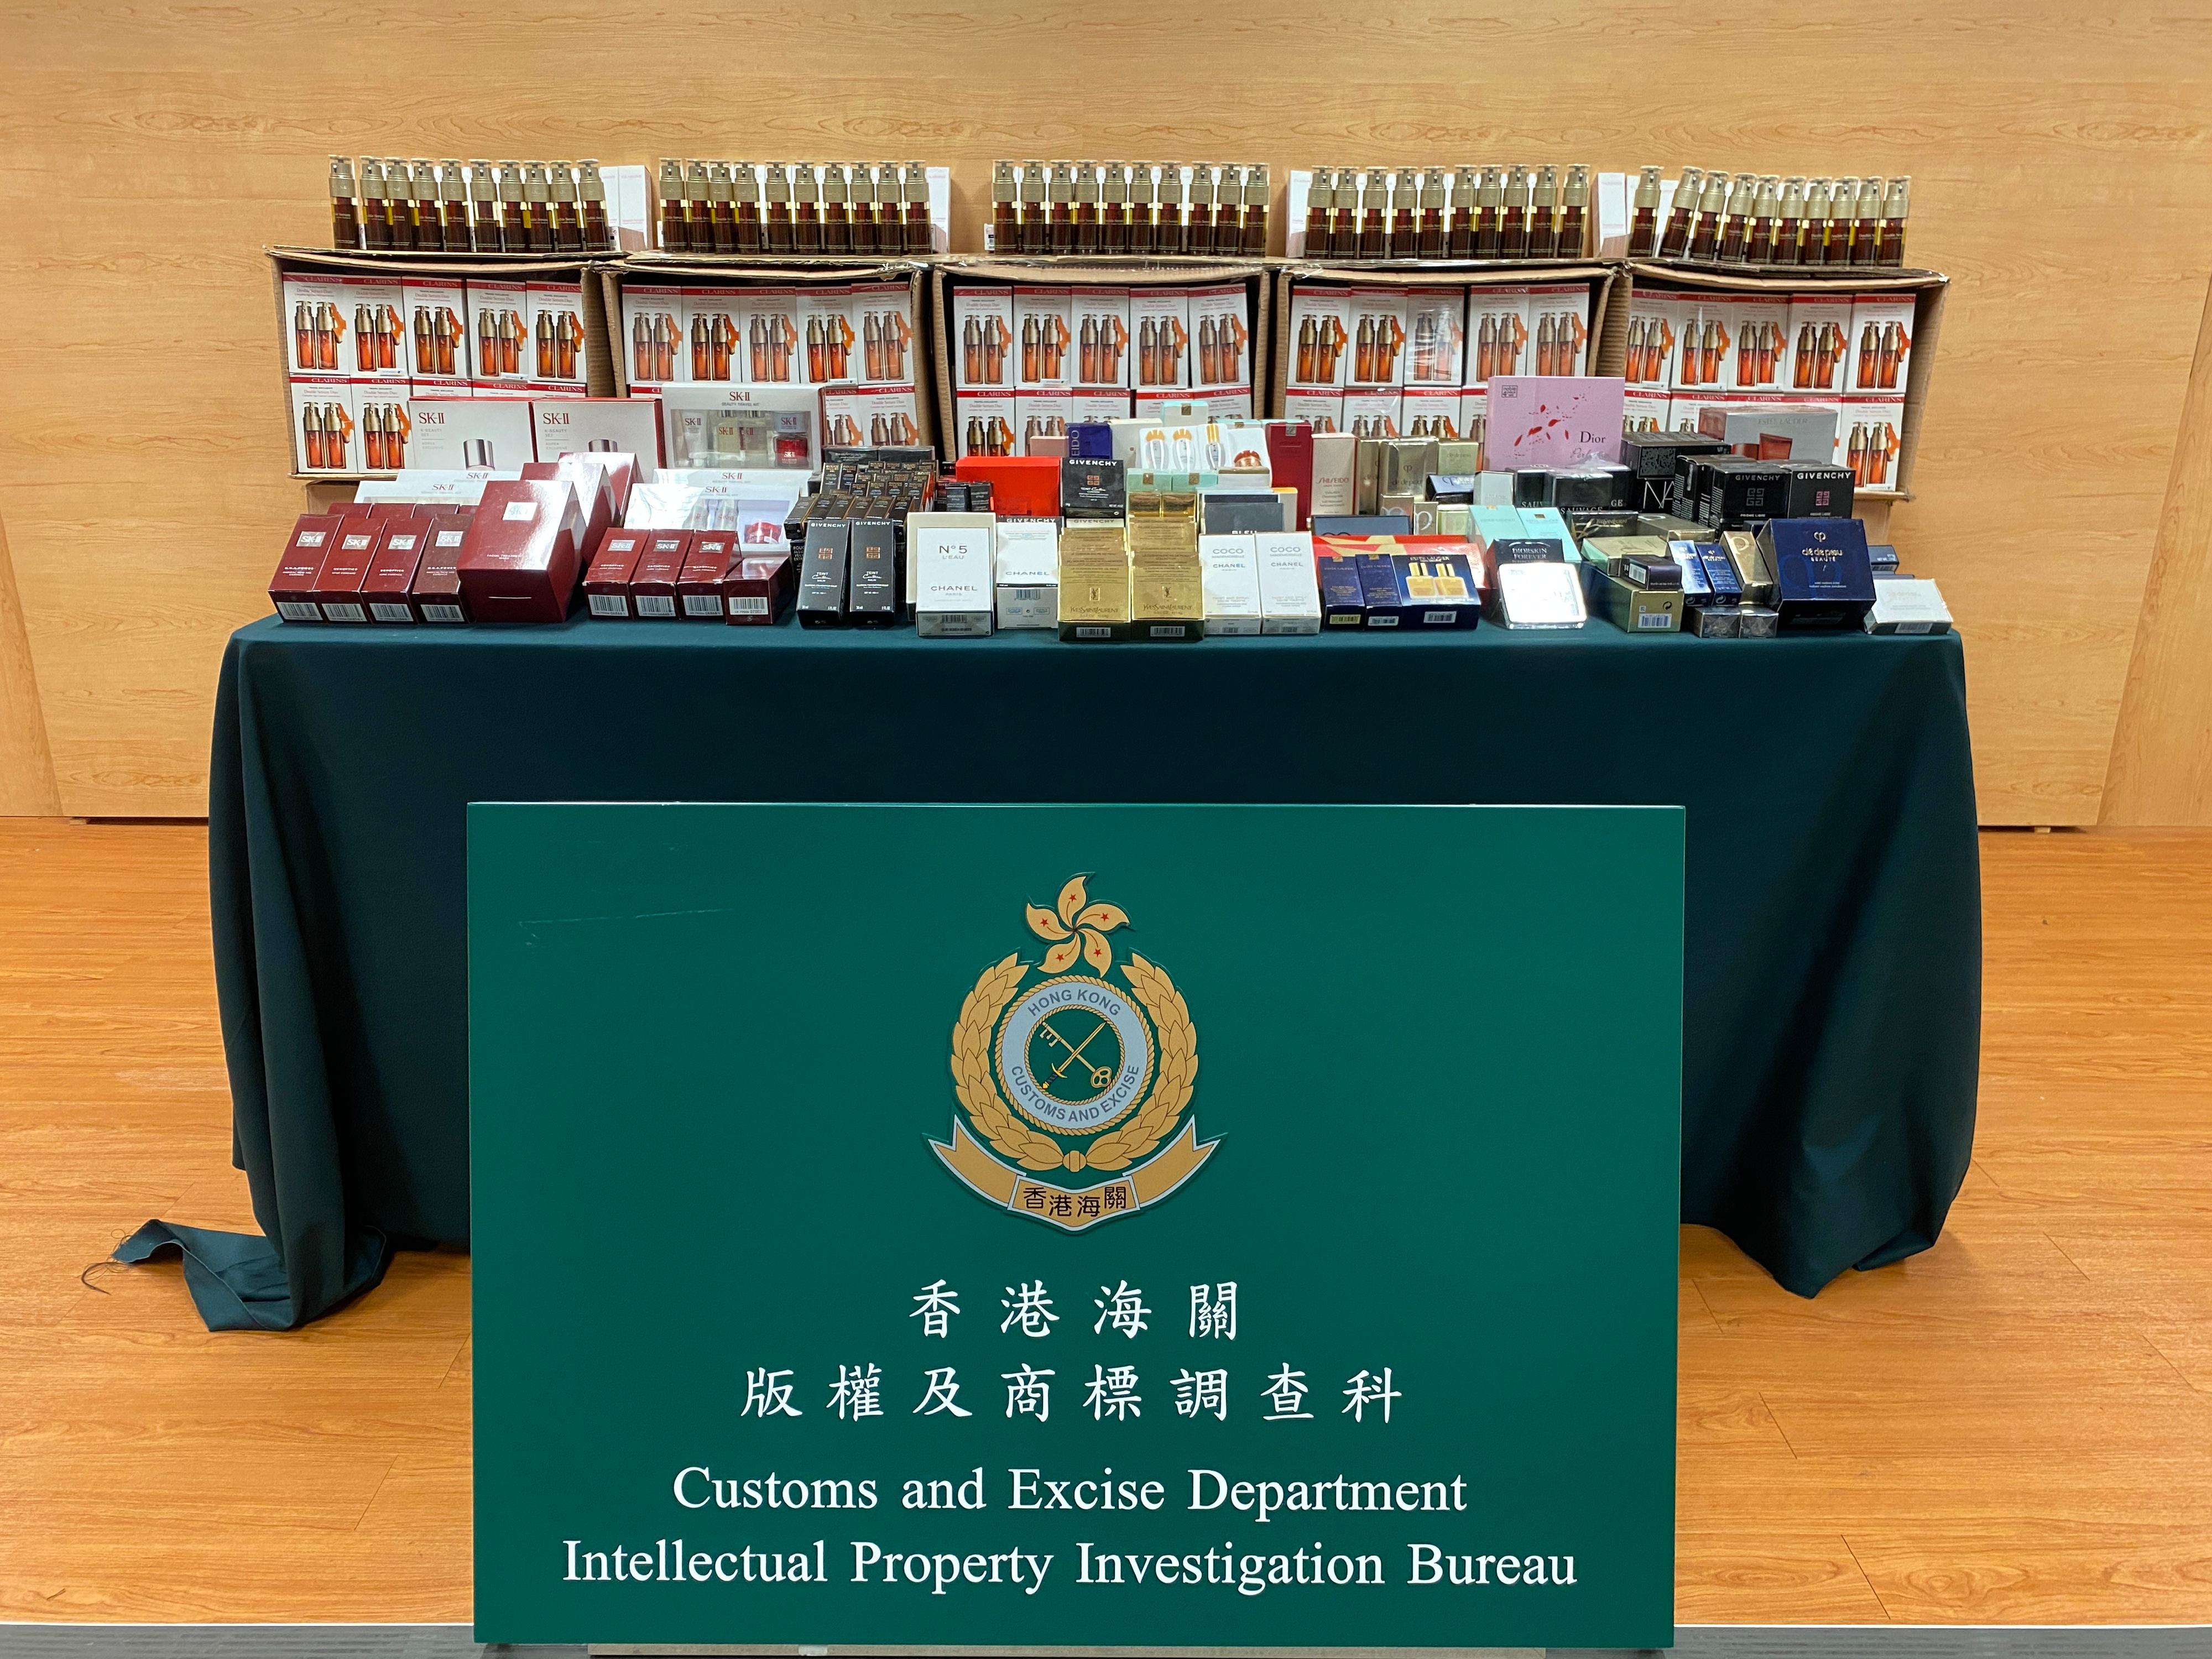 Hong Kong Customs yesterday (January 10) detected a case involving online sale of counterfeit cosmetics products and perfume and seized about 2 600 items of suspected counterfeit products with an estimated market value of about $960,000. Photo shows some of the suspected counterfeit products seized.